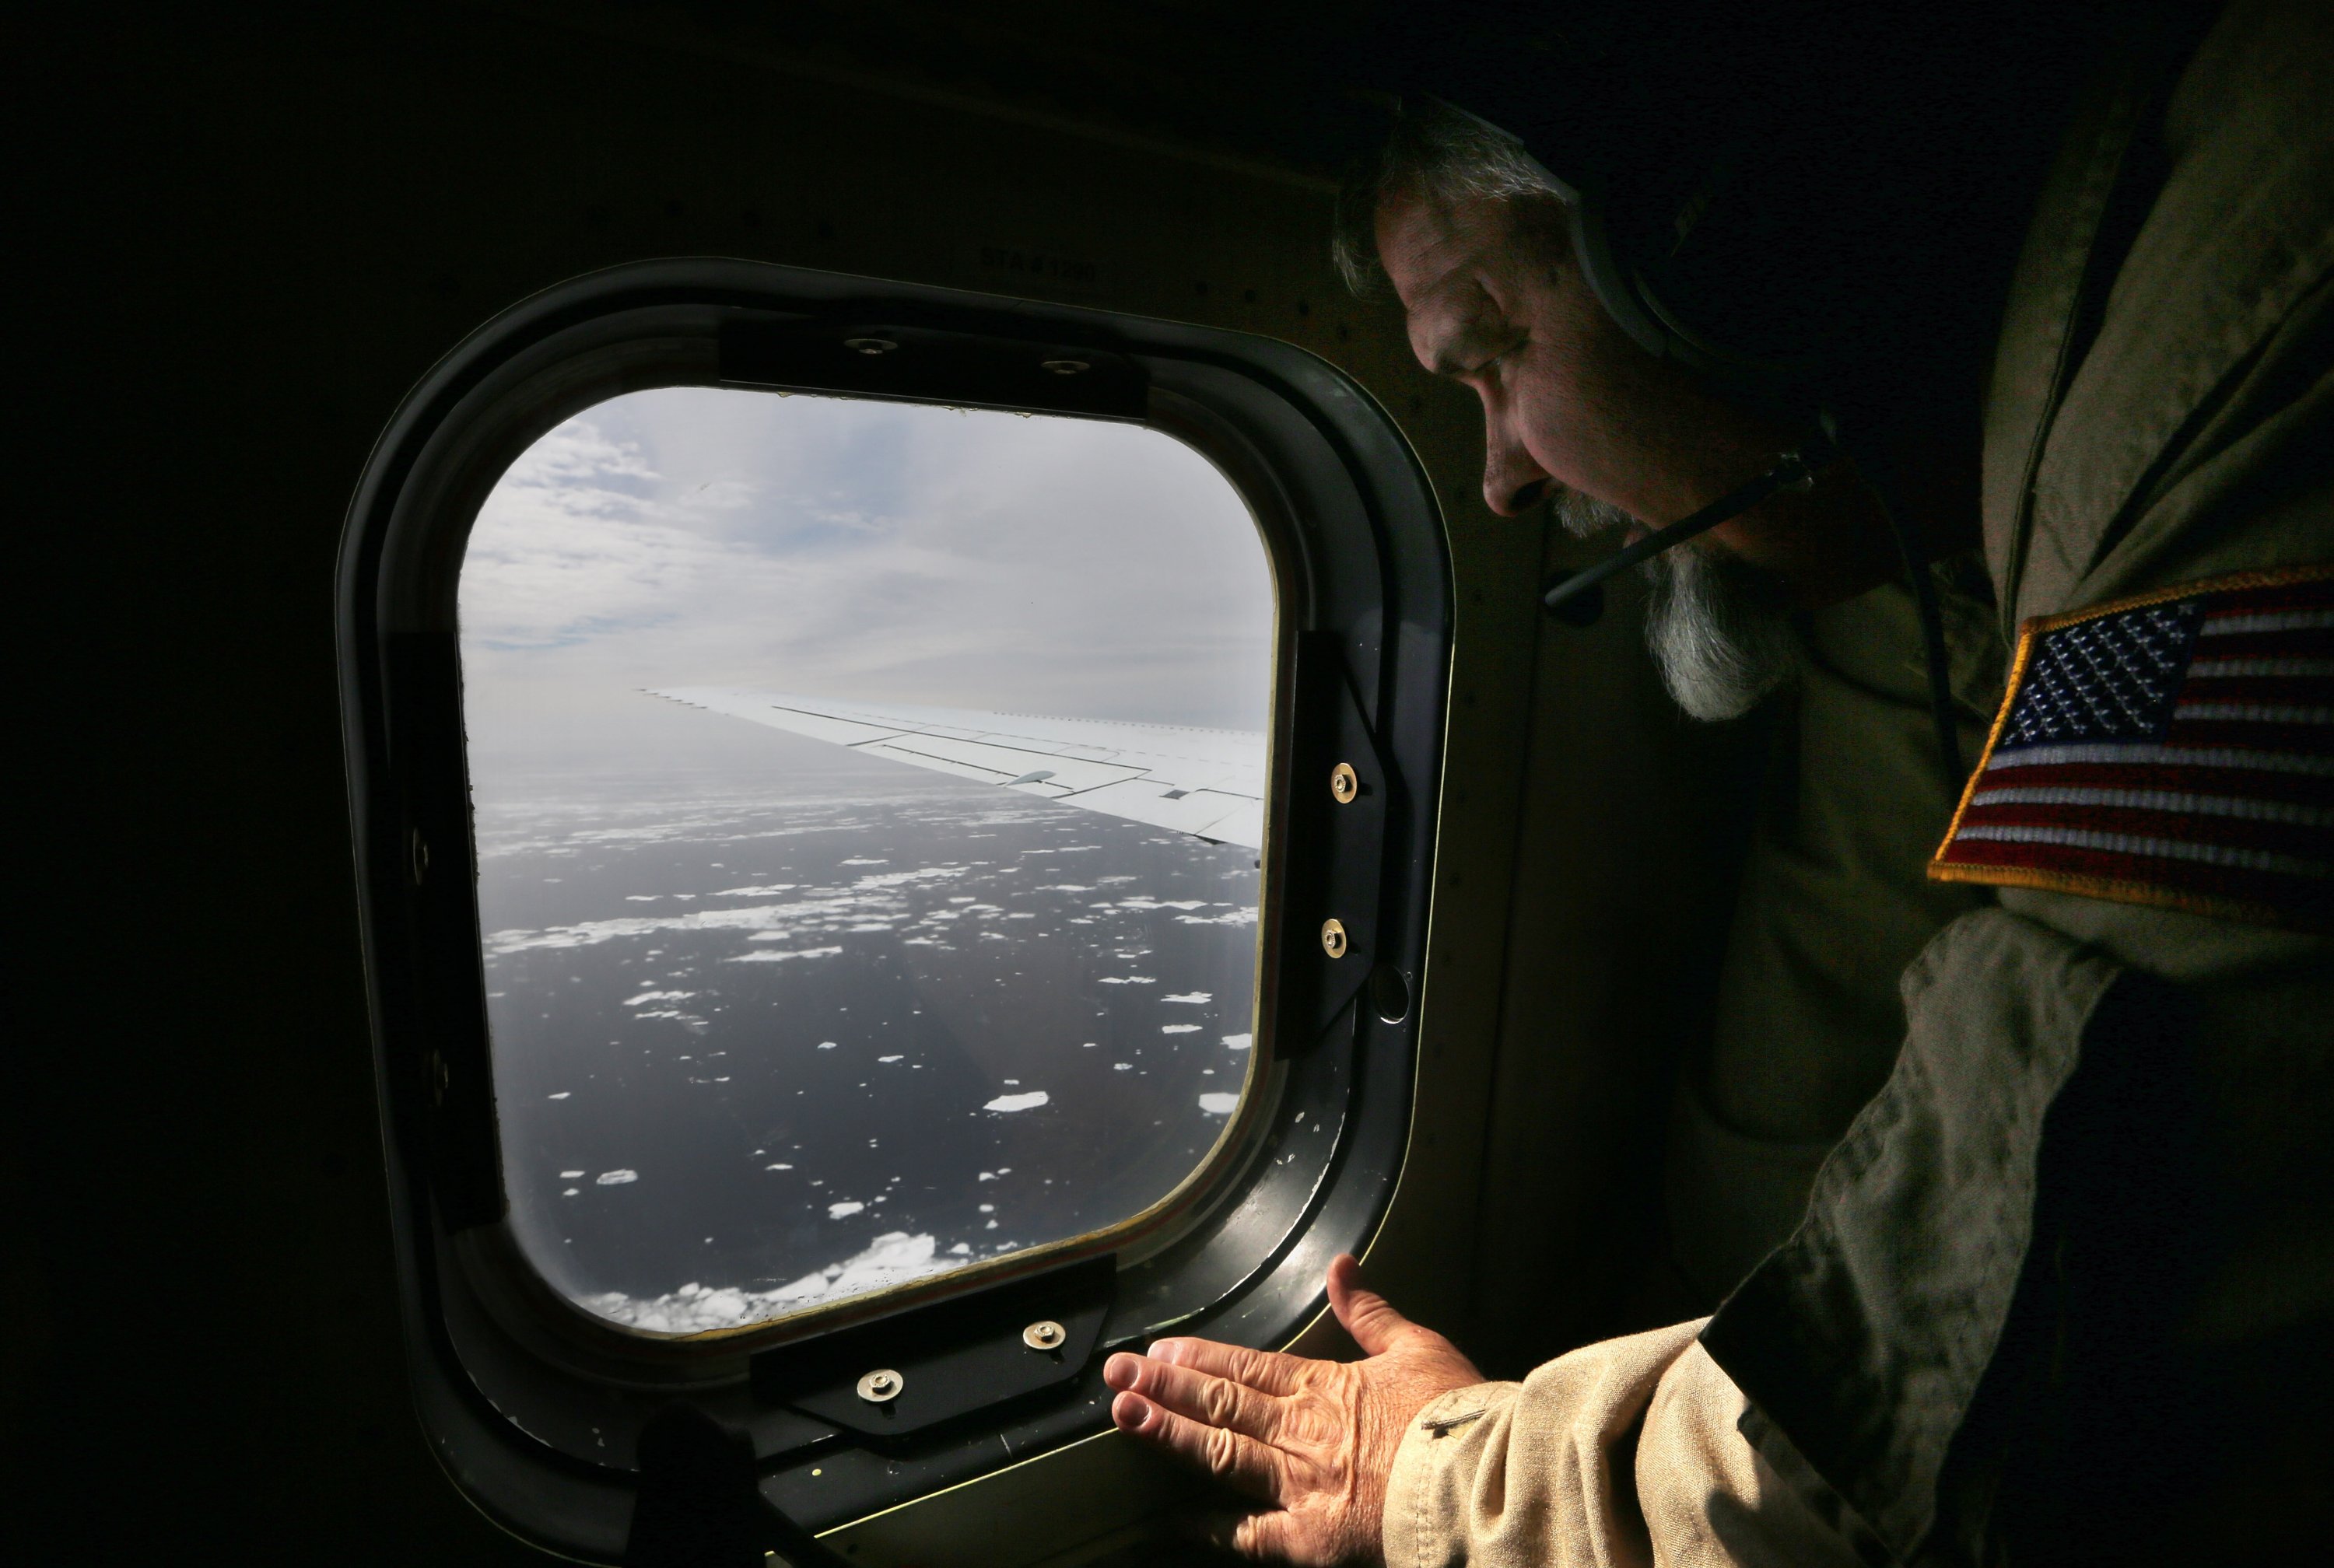 Lyn Lohberger of NASA looks out as sea ice floats near the coast of West Antarctica from a window of a NASA Operation IceBridge airplane on October 27, 2016 in-flight over Antarctica. (Getty Images)